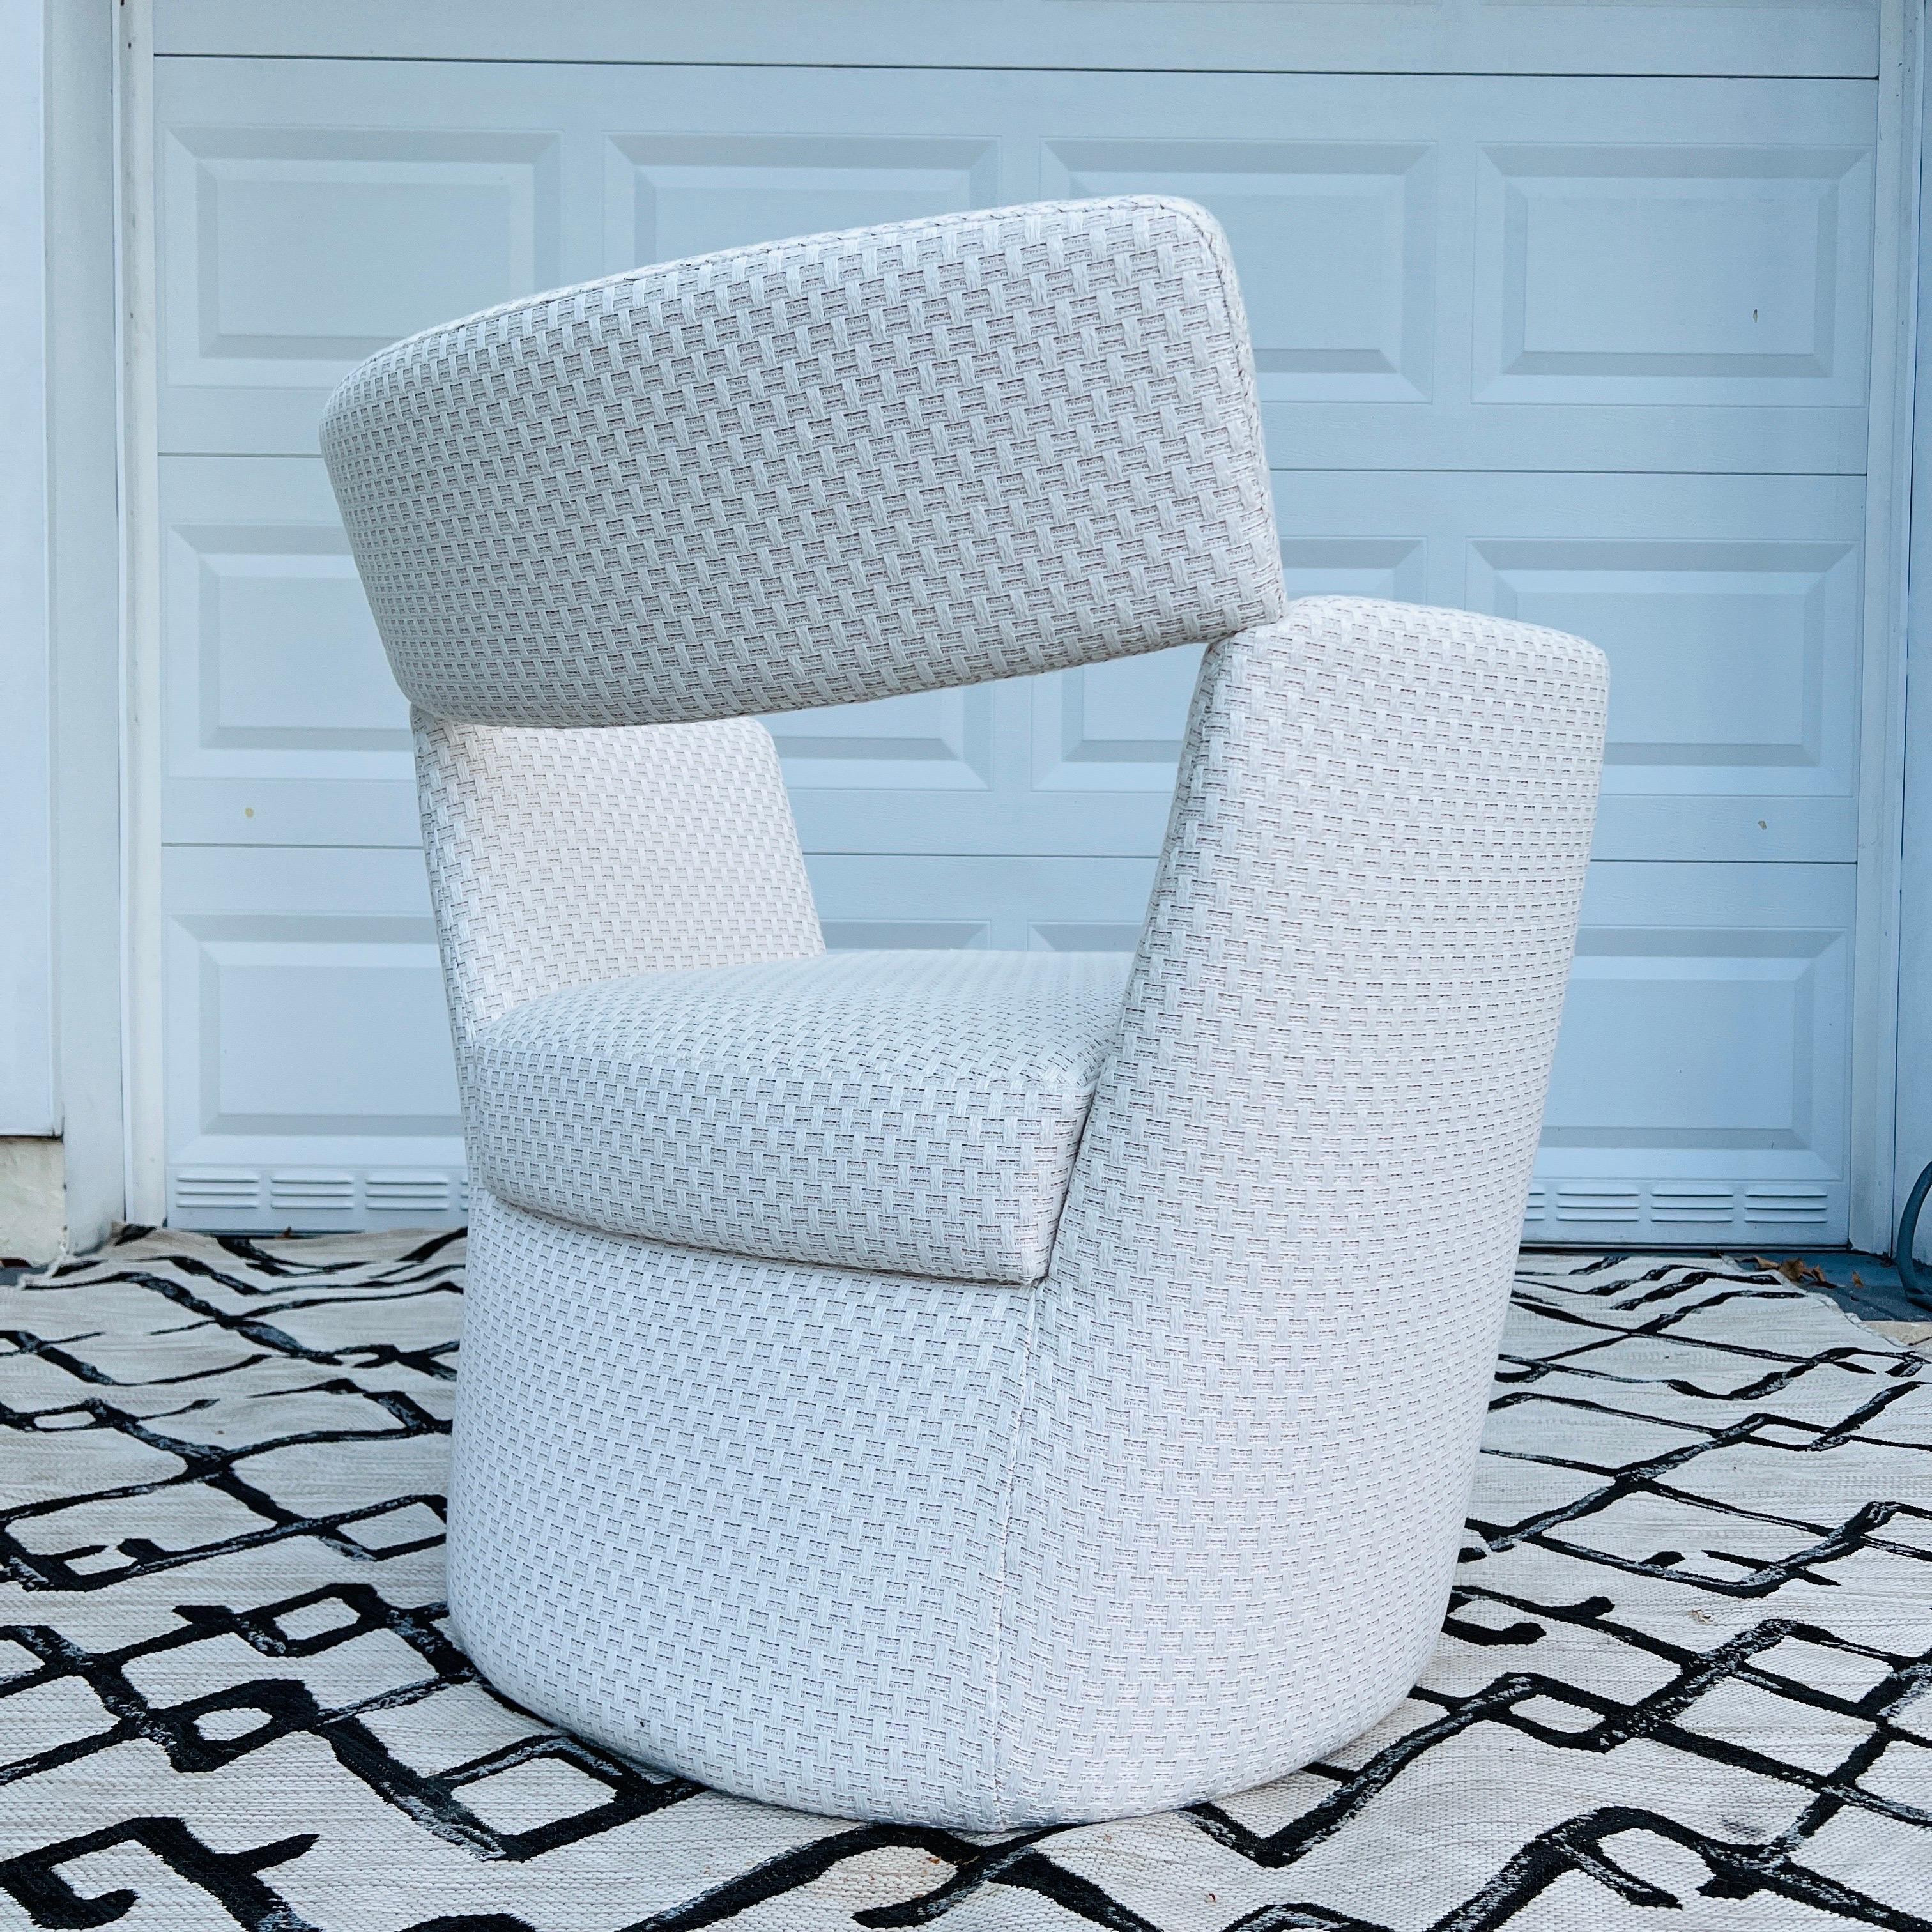 Modernist Armchair in Woven Outdoor Fabric by Pierre Frey In Excellent Condition For Sale In Fort Lauderdale, FL